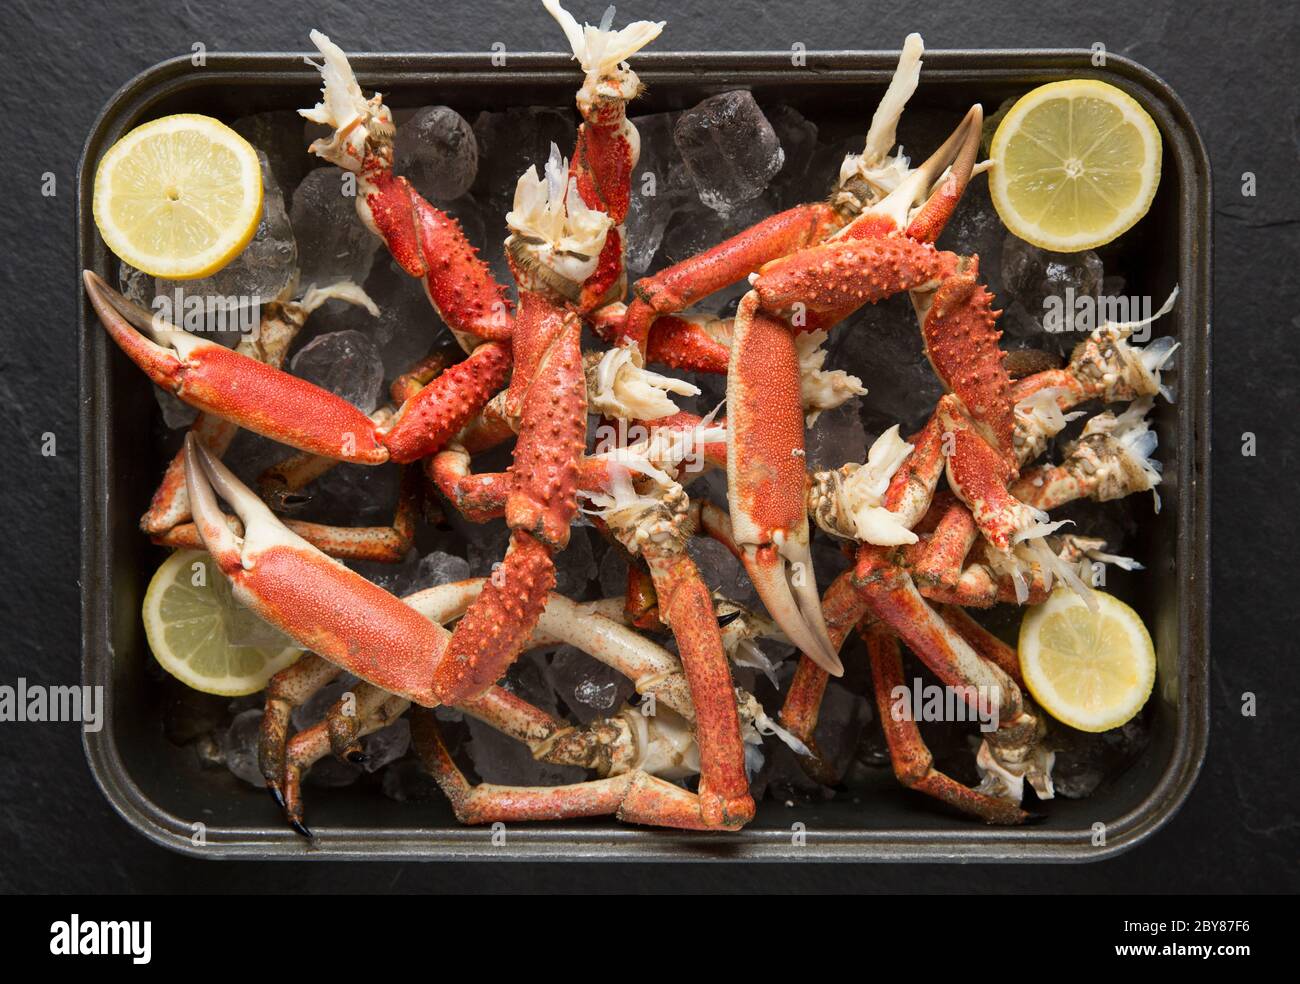 Boiled, cooked spider crab legs, Maja brachydactyla, caught in the English Channel that have been chilled on ice. White crab meat can be extracted fro Stock Photo